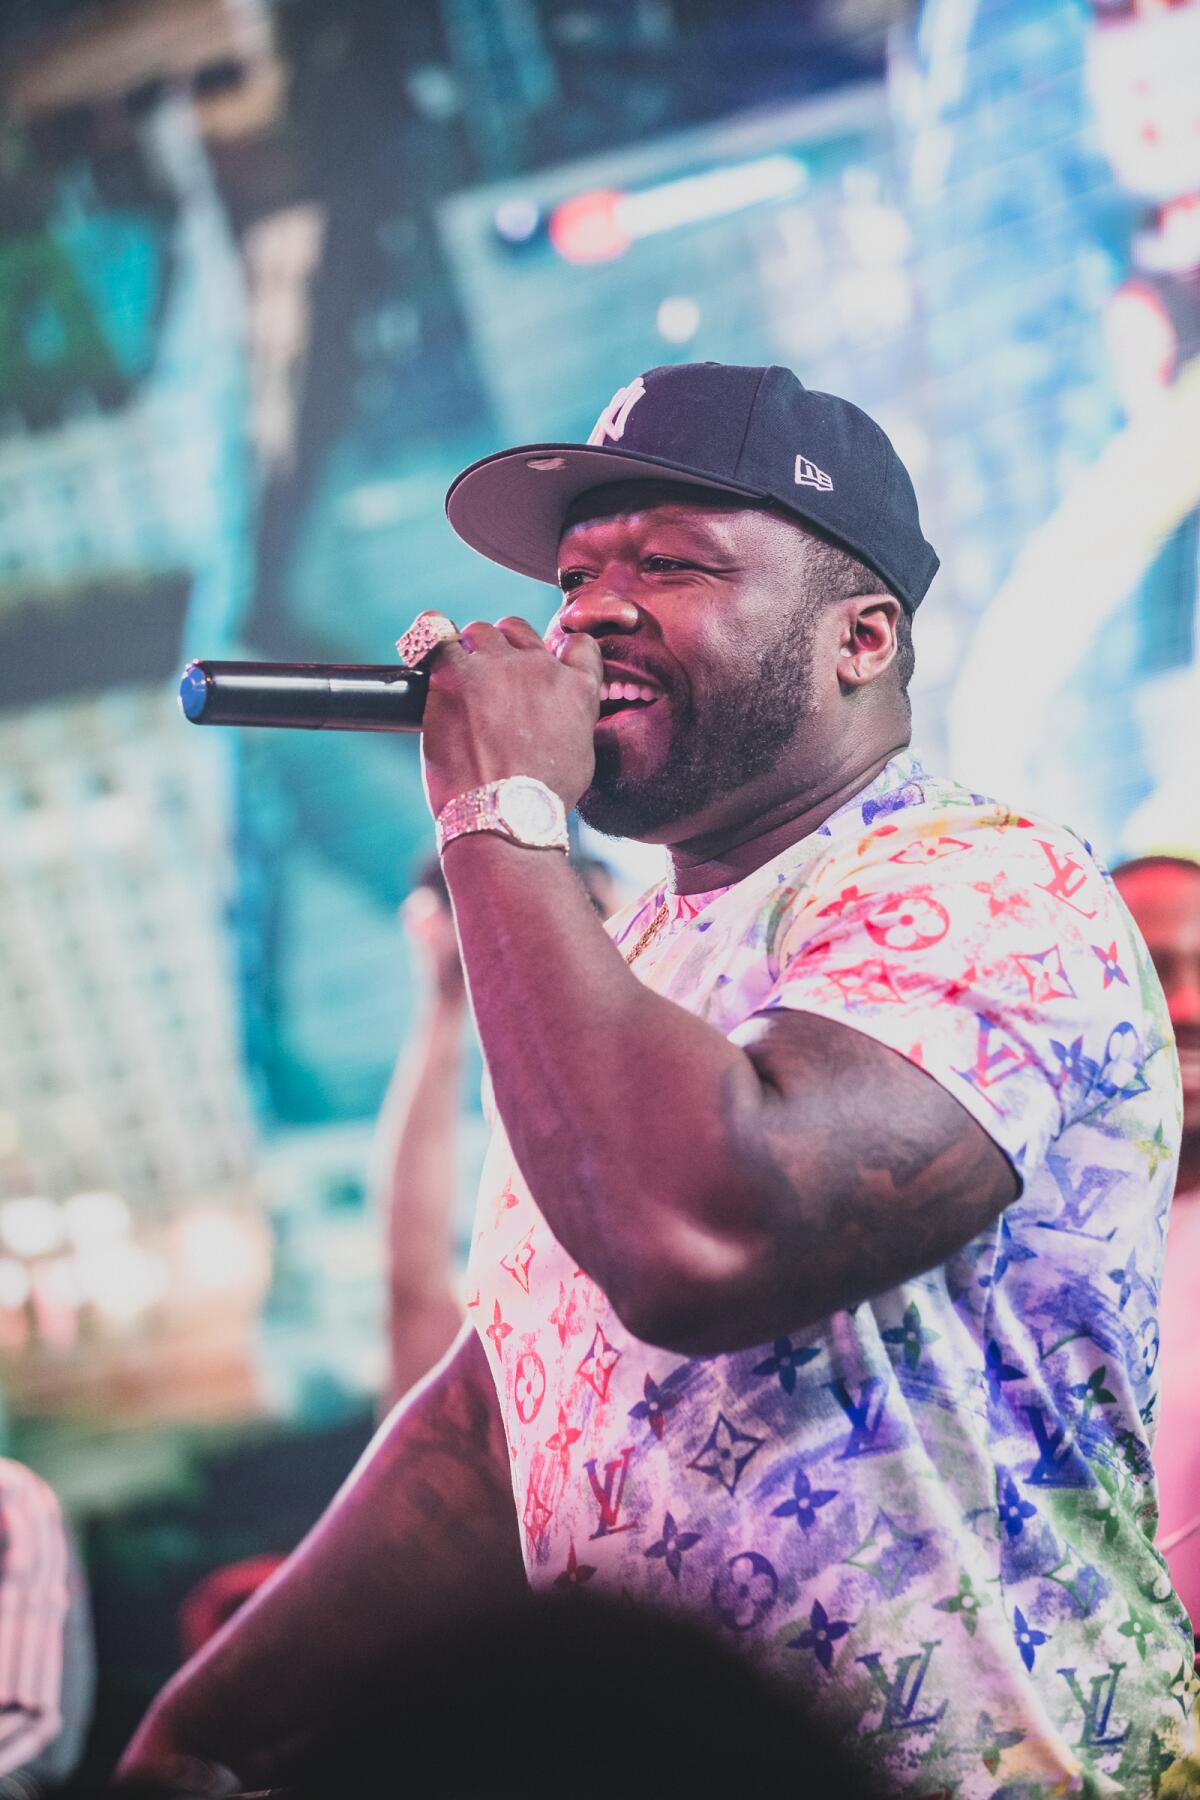 Rapper 50 Cent holds a mic as he raps on stage wearing a baseball cap. 